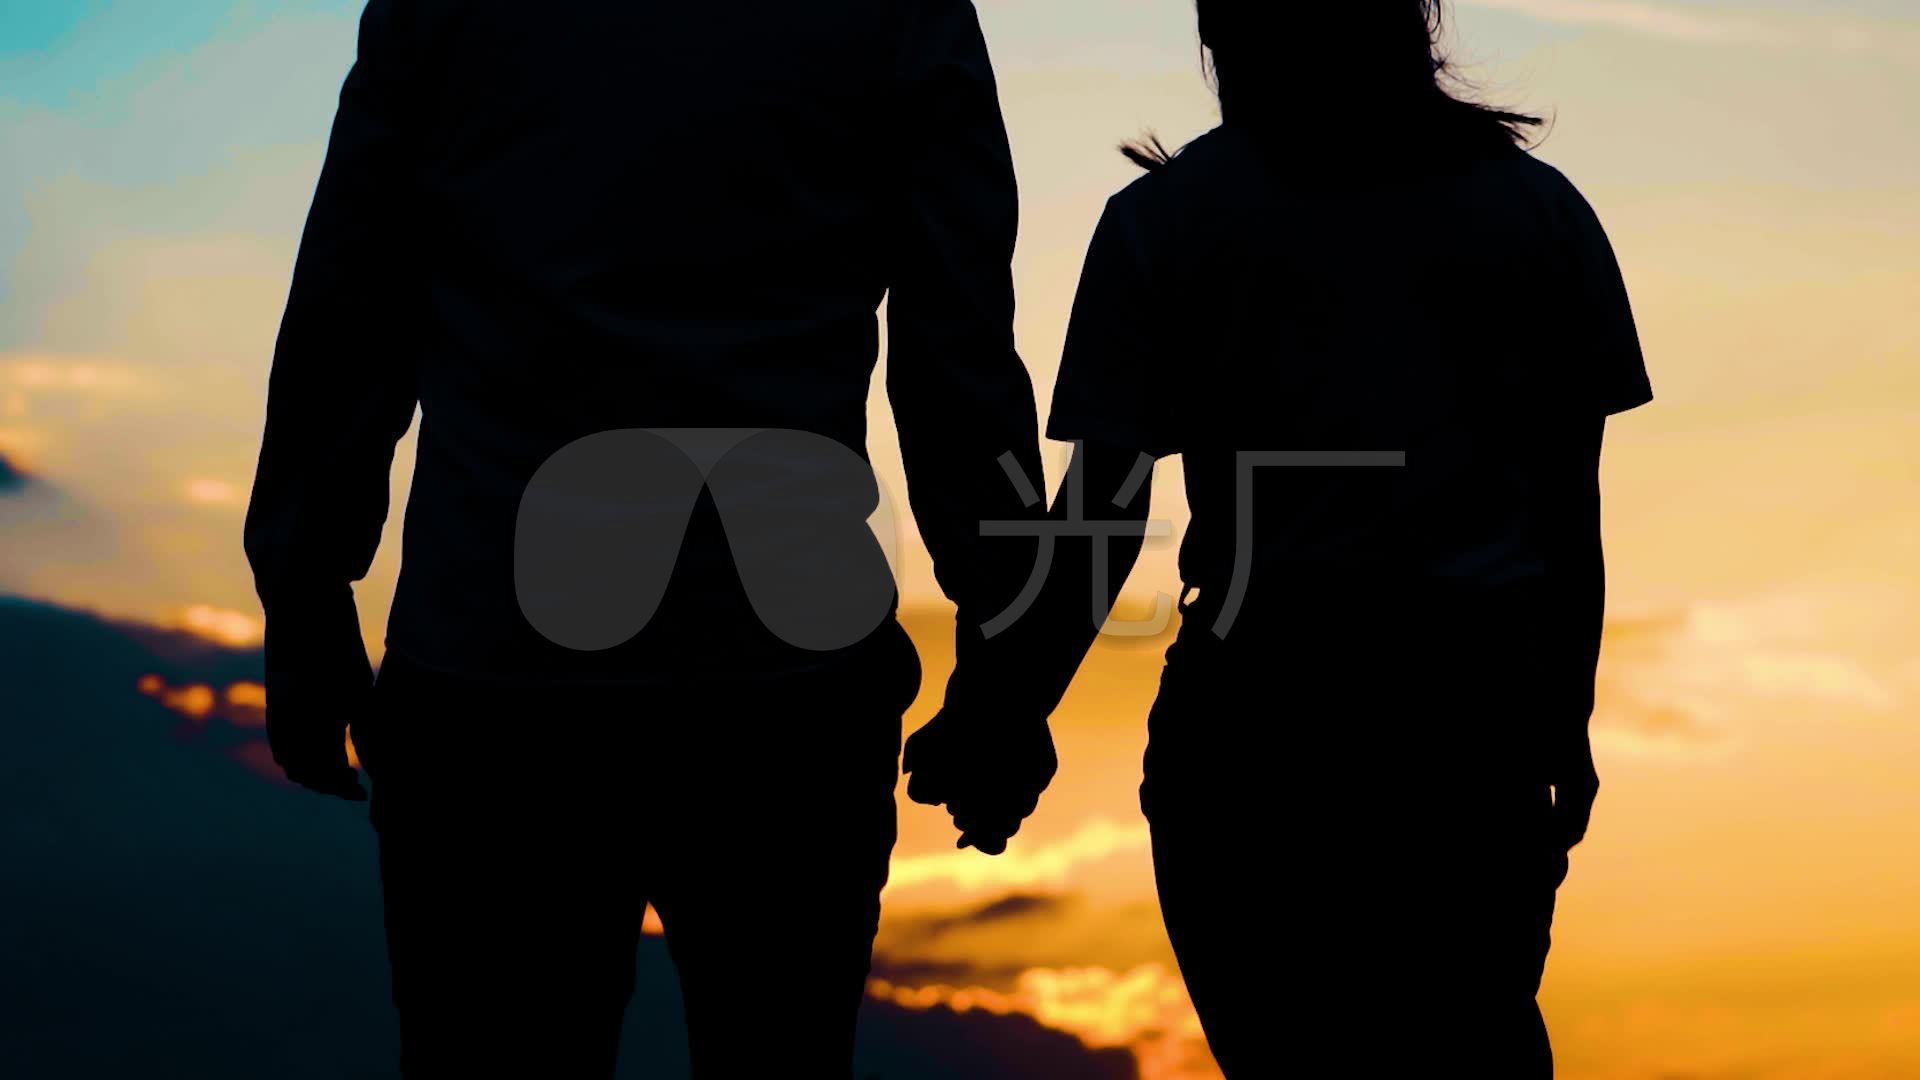 Love,Couple,Holding,Hands,Fingers,At,Sunset,On,The,Beach, - Beacon CARE ...